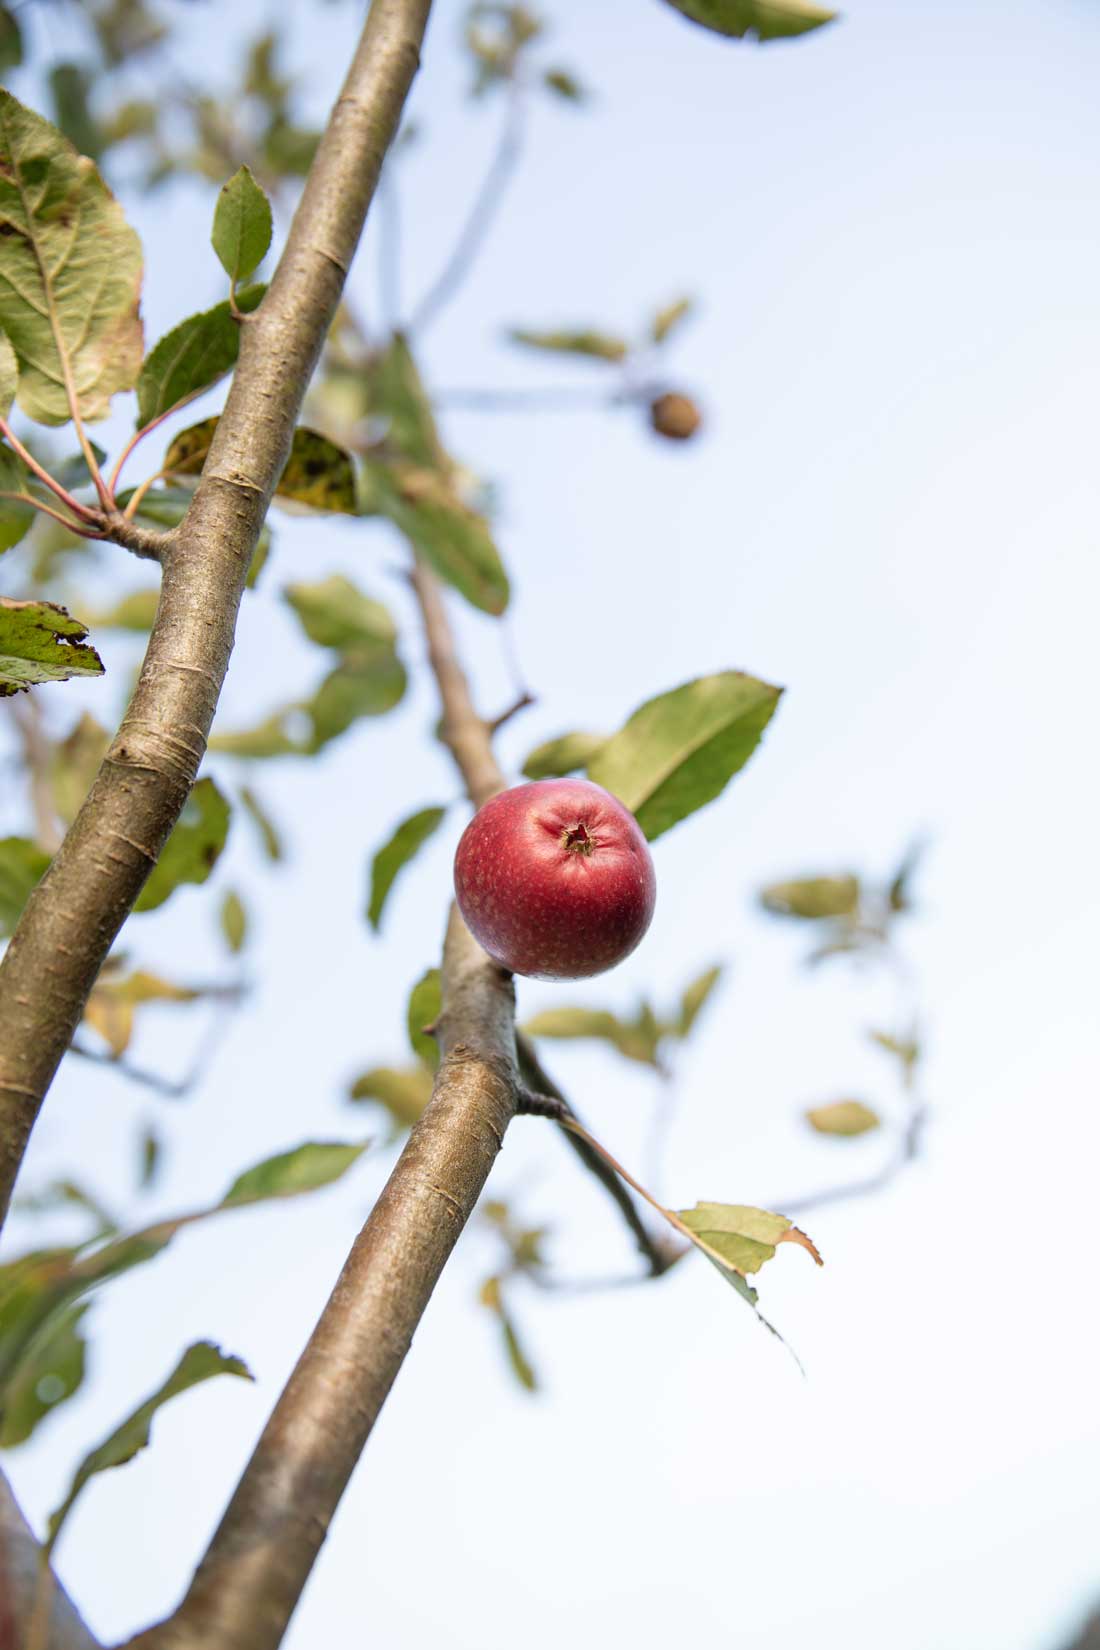 Close up of an apple on a tree. Credit Charlie Fox.